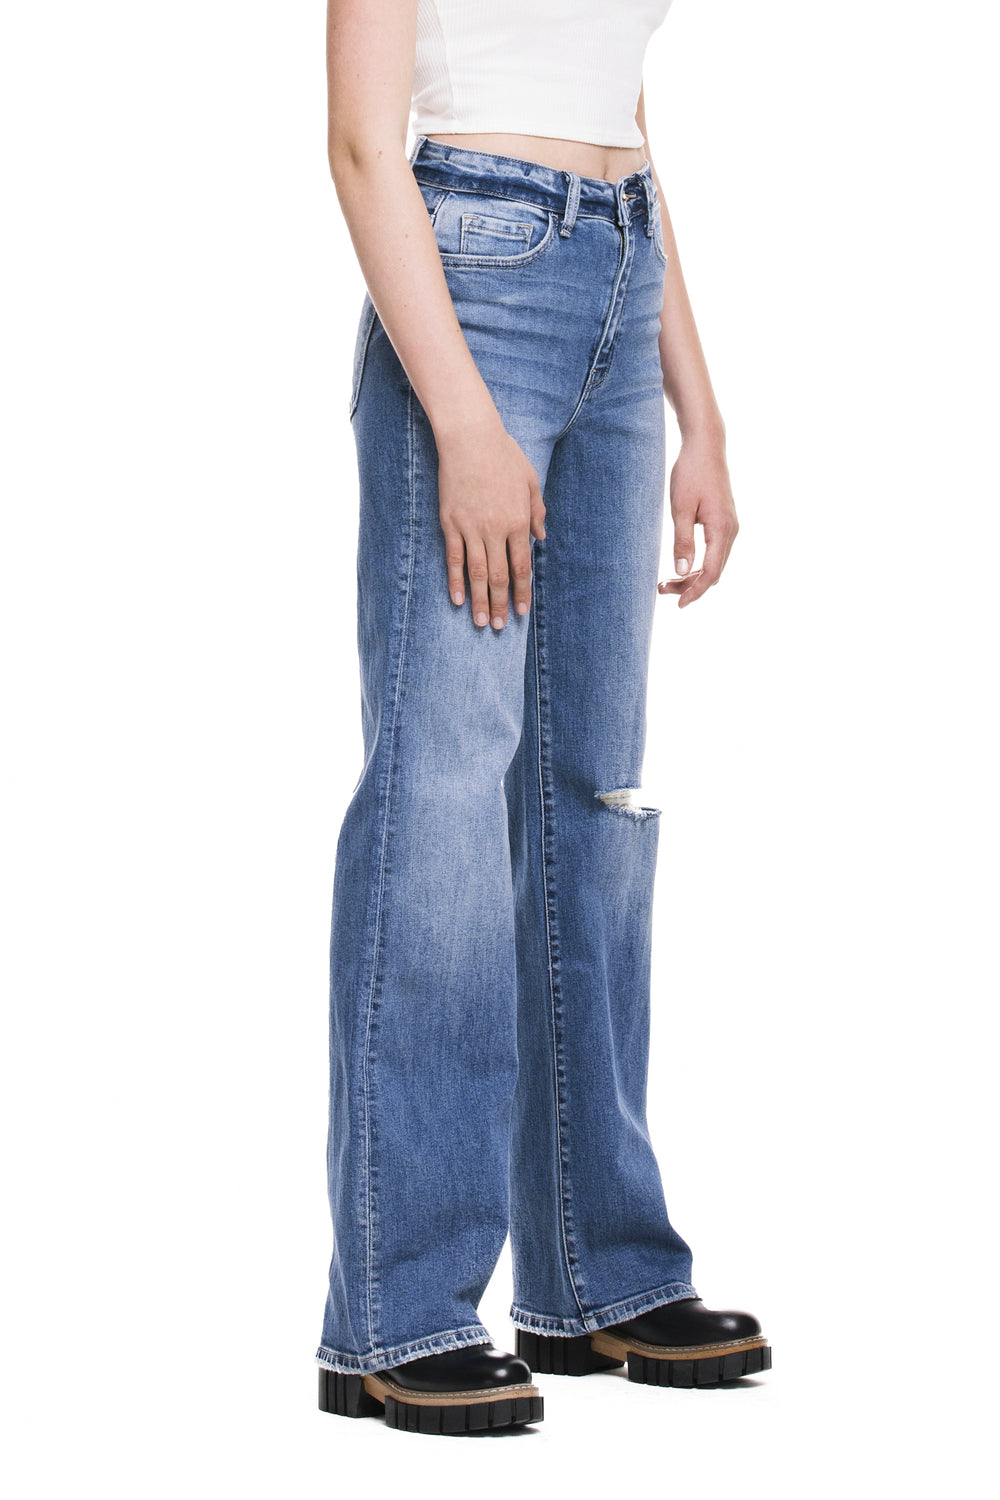 Young Folks 90's Vintage Flare Jeans - Expressive Collective CO.